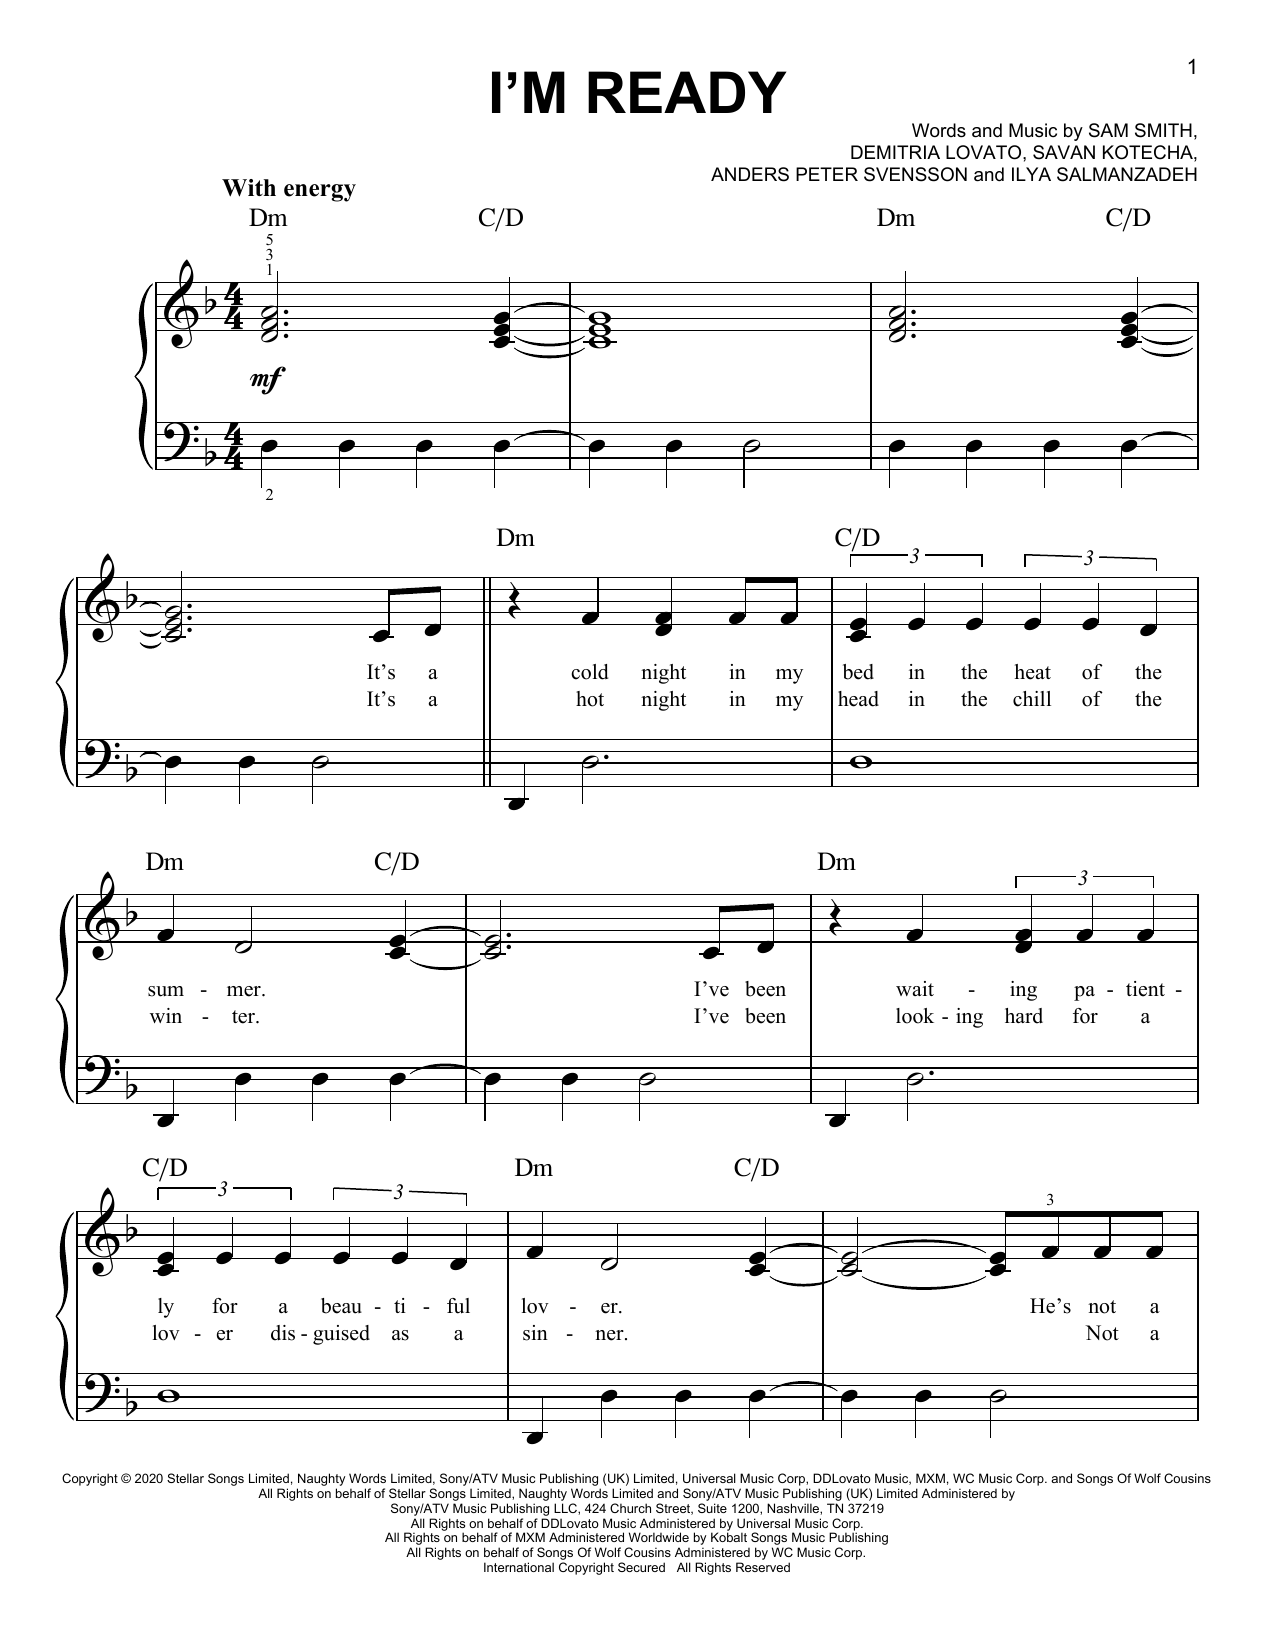 Download Sam Smith and Demi Lovato I'm Ready Sheet Music